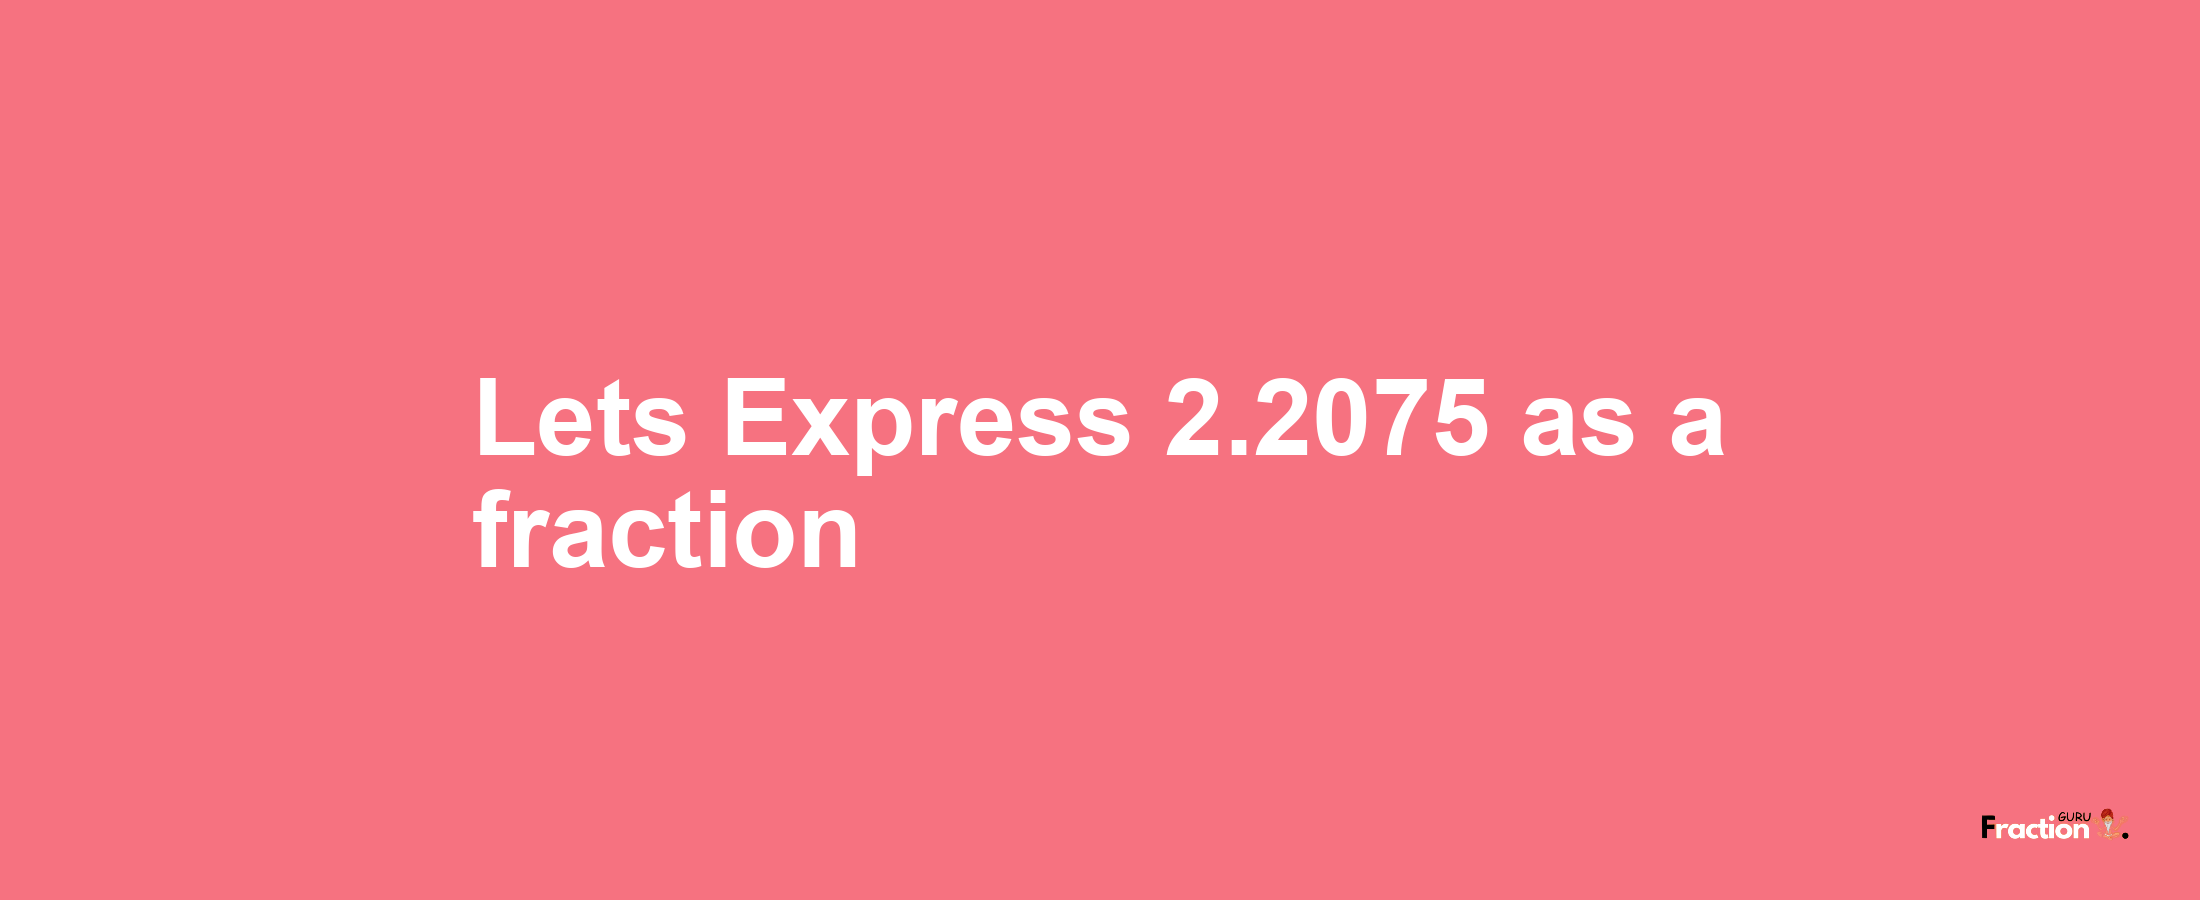 Lets Express 2.2075 as afraction